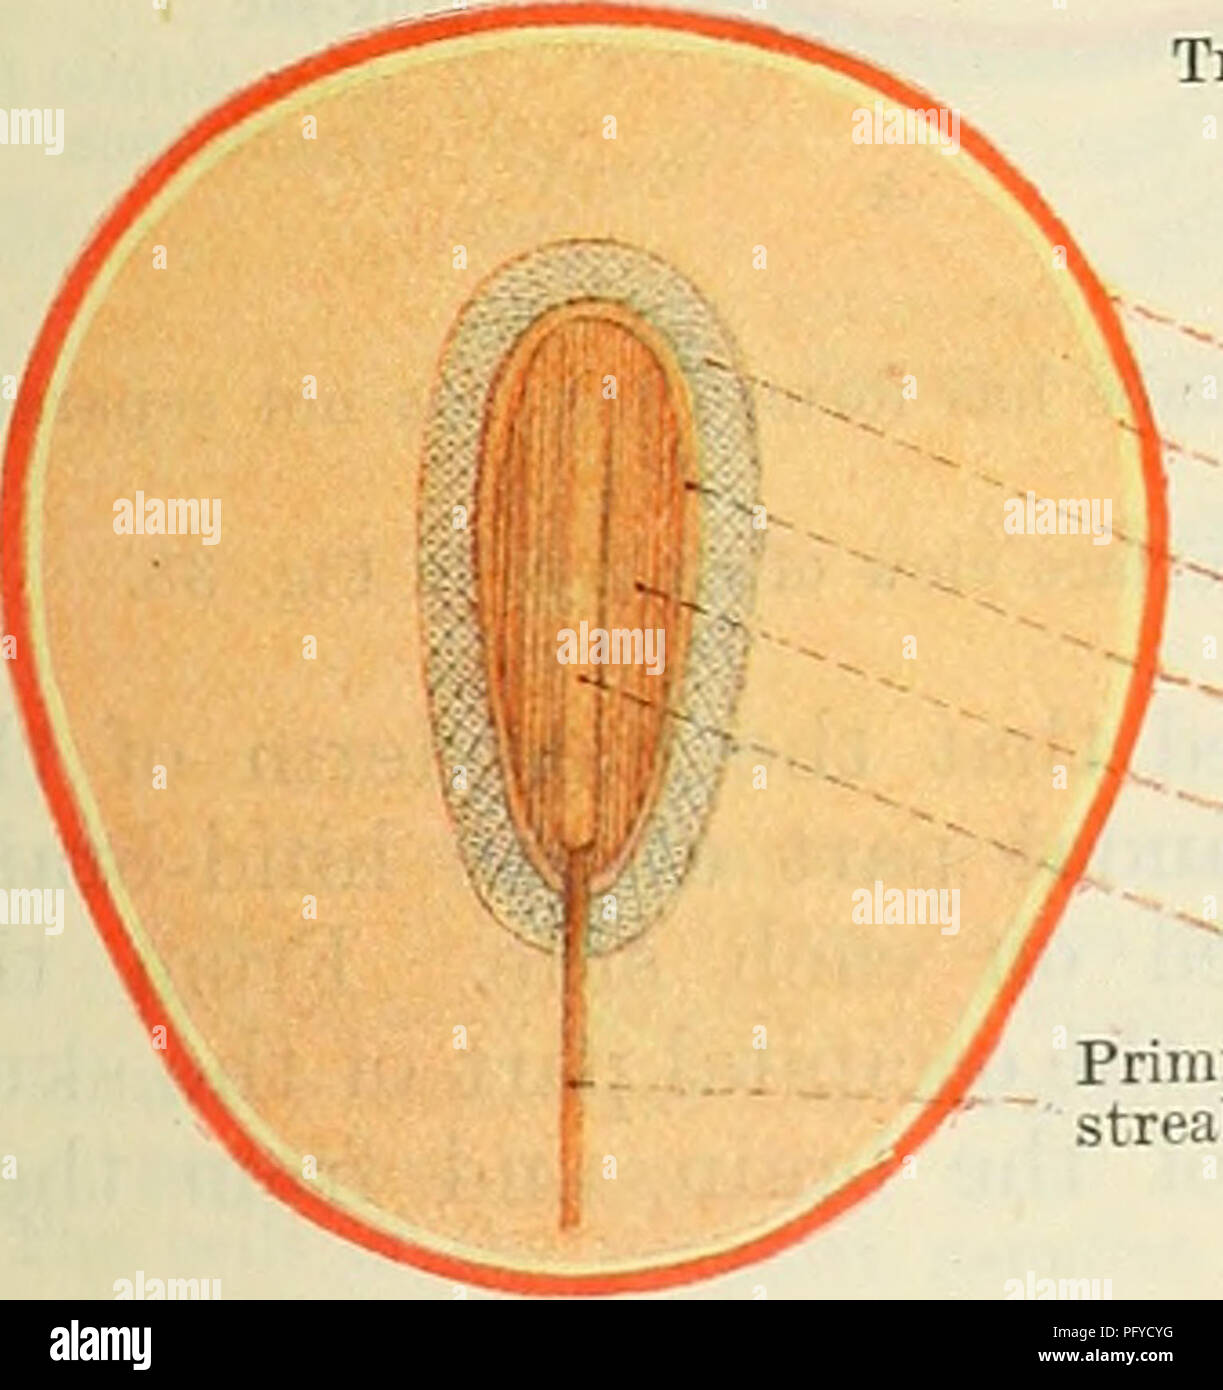 . Cunningham's Text-book of anatomy. Anatomy. Notochord Mesoderm of chorion Trophoblast of chorion Pig. 41. A. Transverse section of a zygote, showing the constituent parts. B. Diagram of embryonic area showing parts of neural plate and primitive streak. The apical portion of the hollow mesodermal somite is its scleratogenous segment. The cells of the scleratogenous section of the somite undergo rapid proliferation. Some of the newly formed scleratogenous cells invade the myoccele ; others migrate towards the notochord ; finally, the scleratogenous cells separate from the remainder of the somi Stock Photo